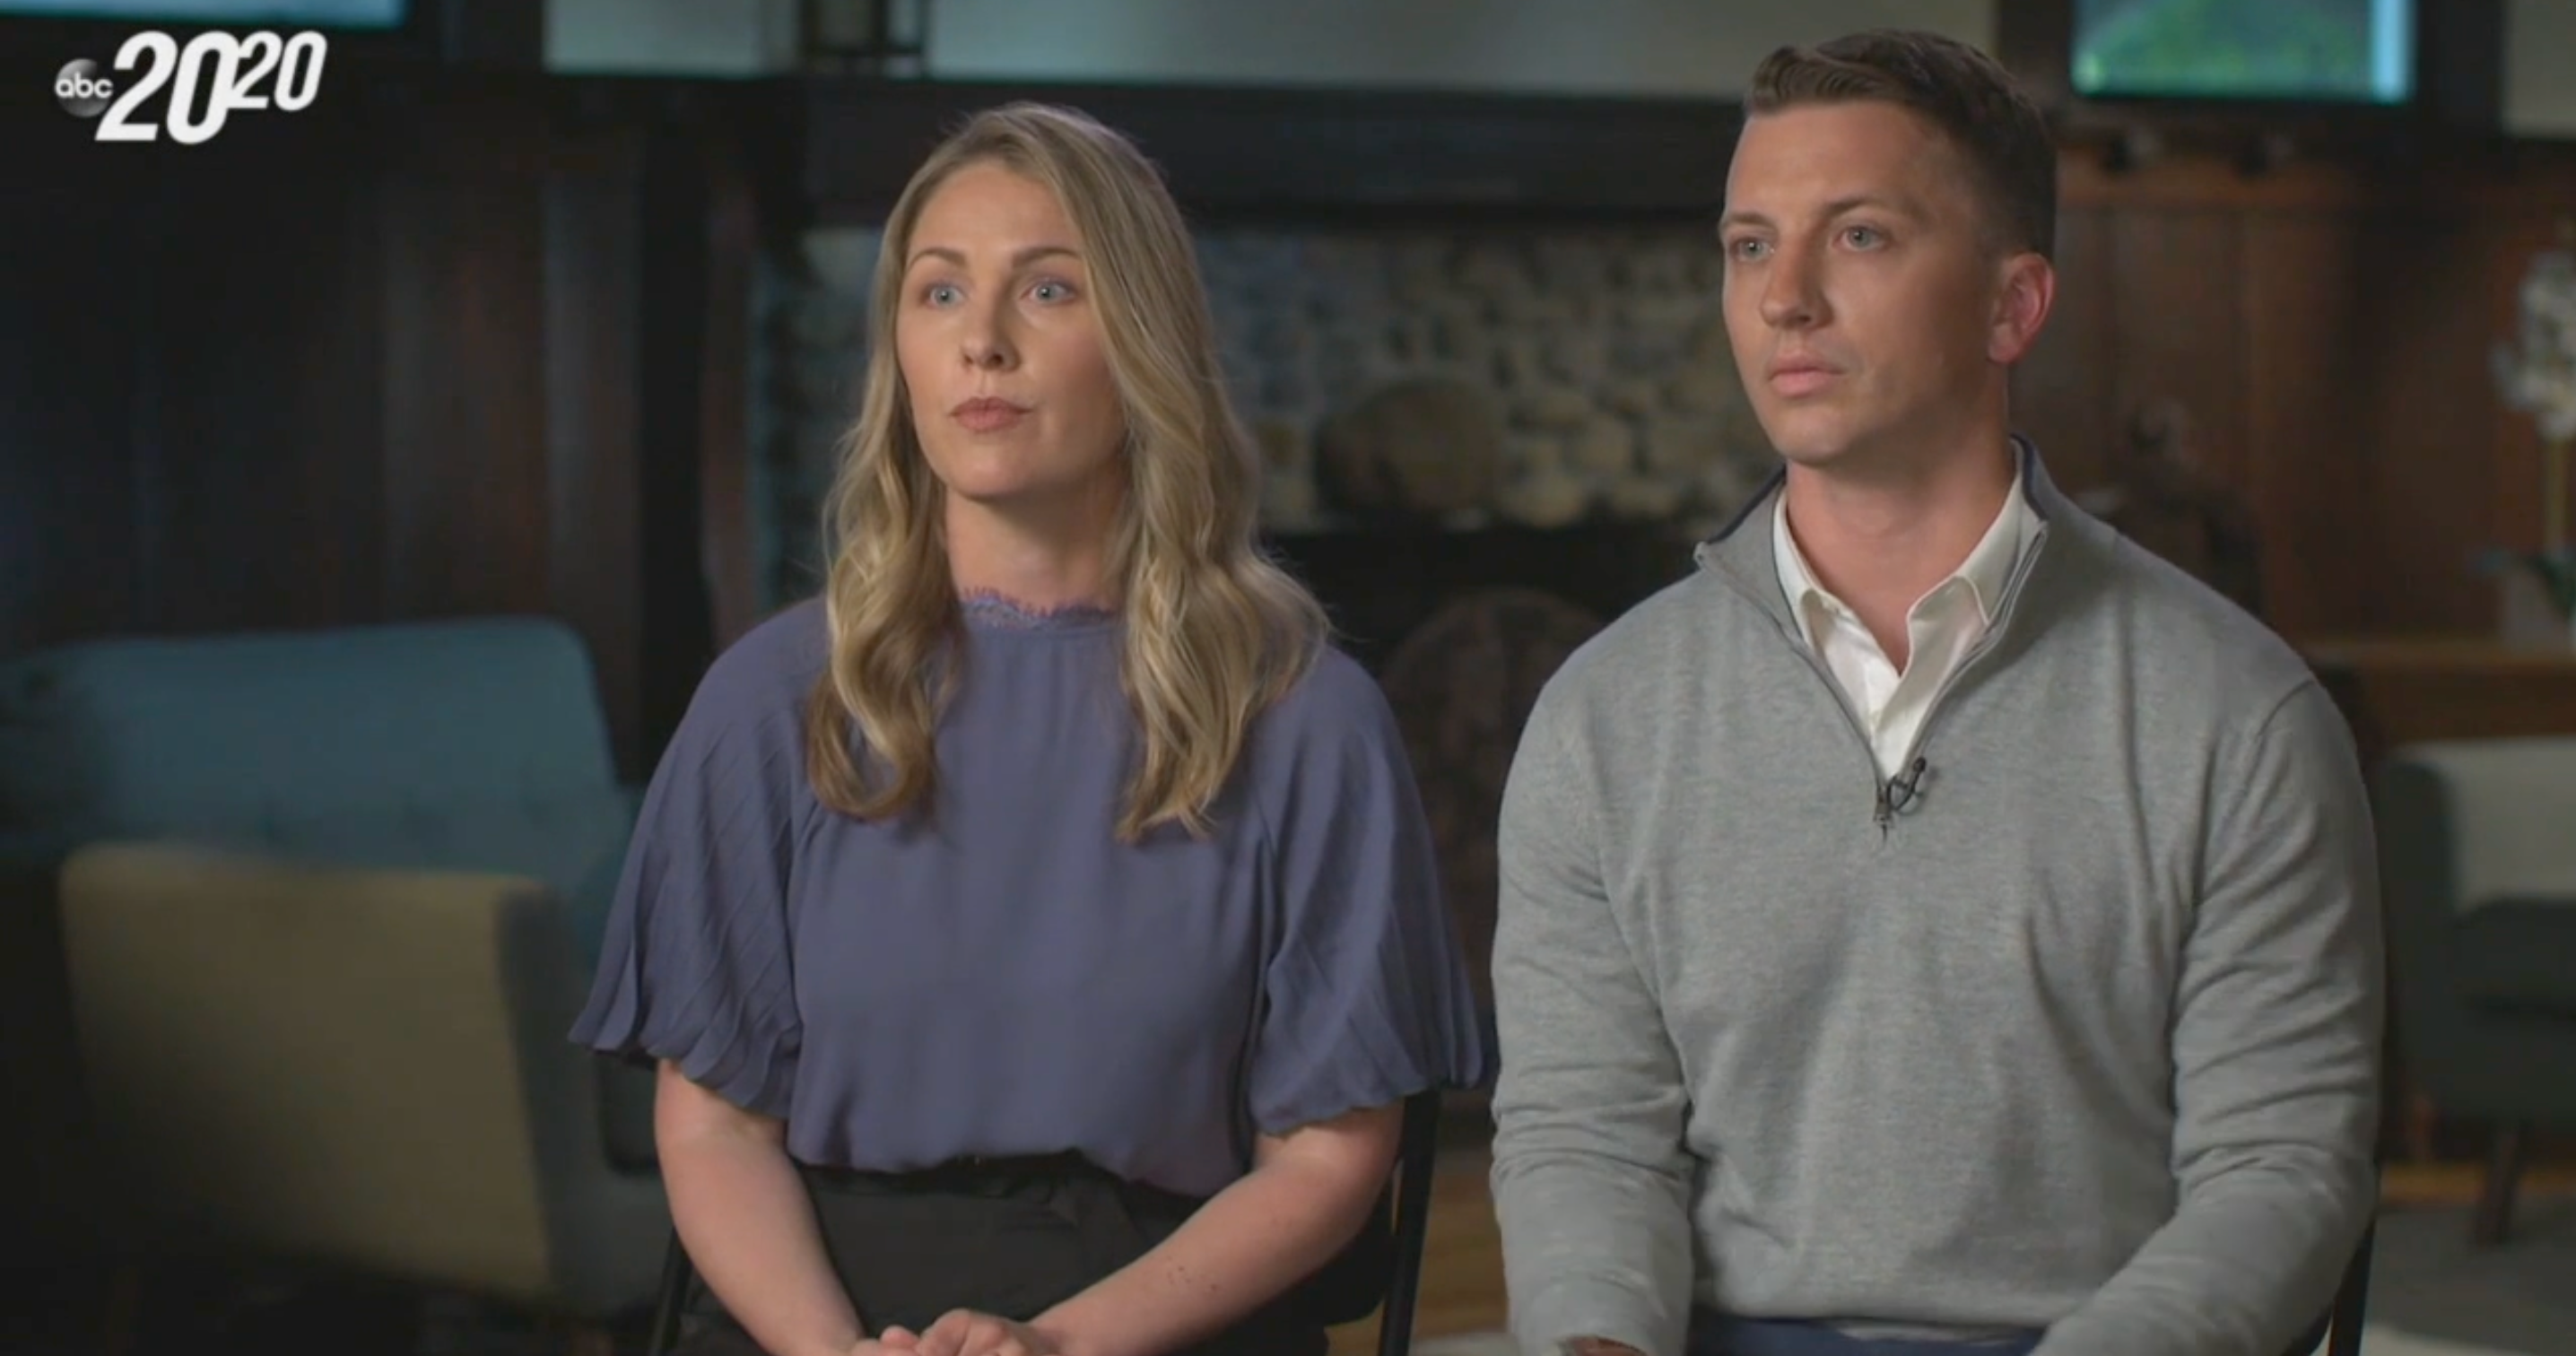 Denise Huskins and Aaron Quinn discuss the kidnapping on '20/20'